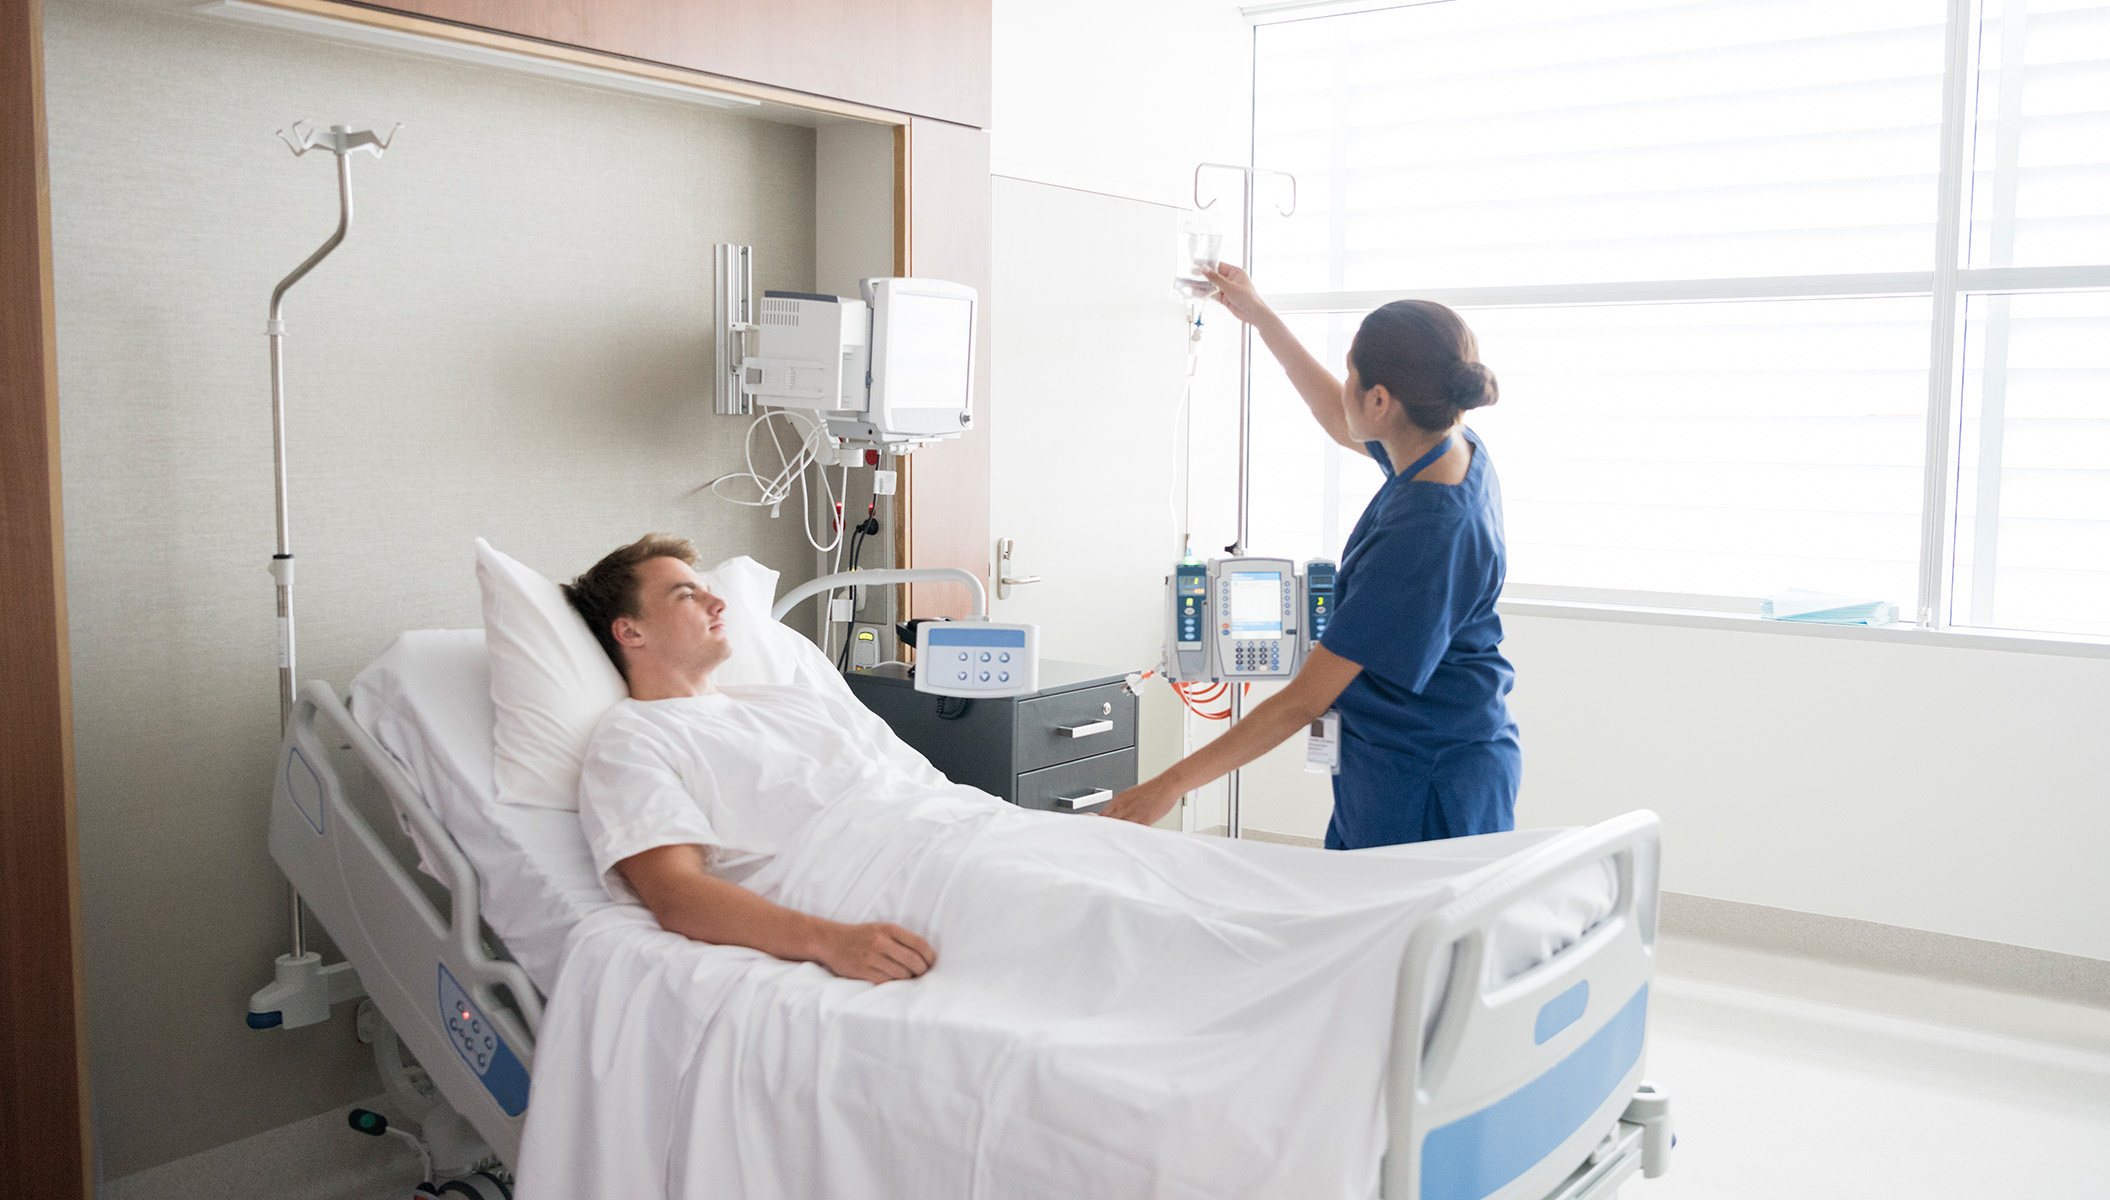 Importance of Temperature and Ventilation in Hospitals